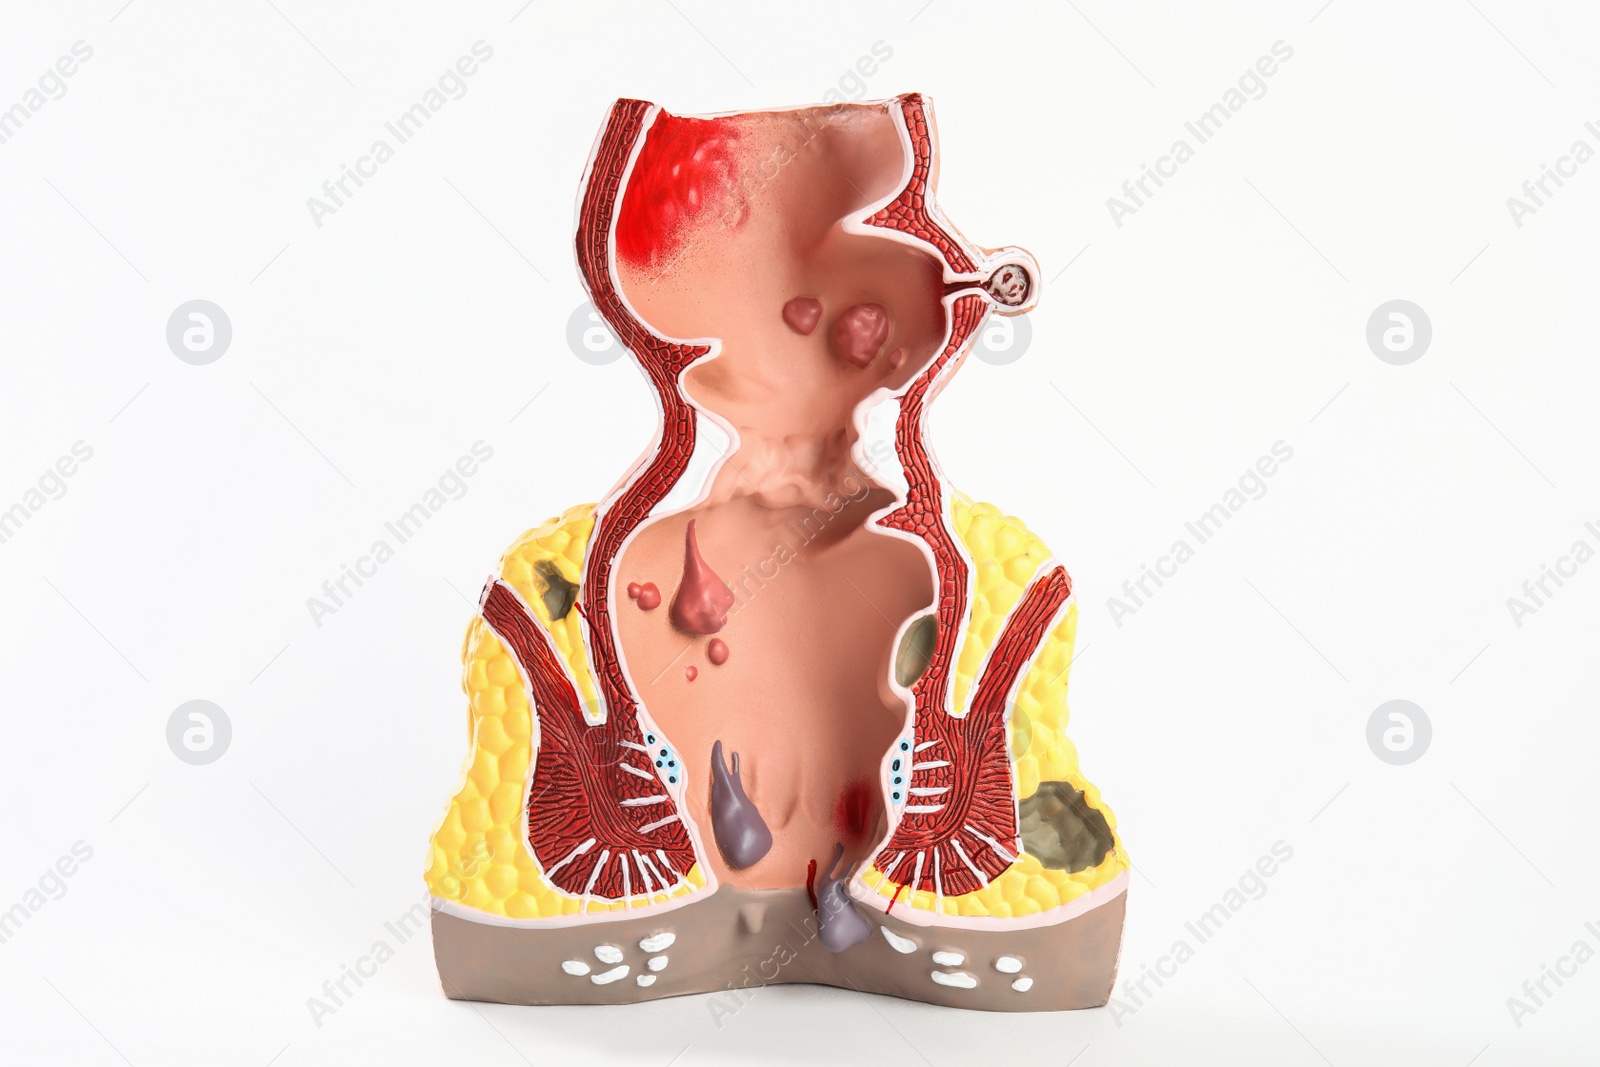 Photo of Anatomical model of rectum with hemorrhoids isolated on white